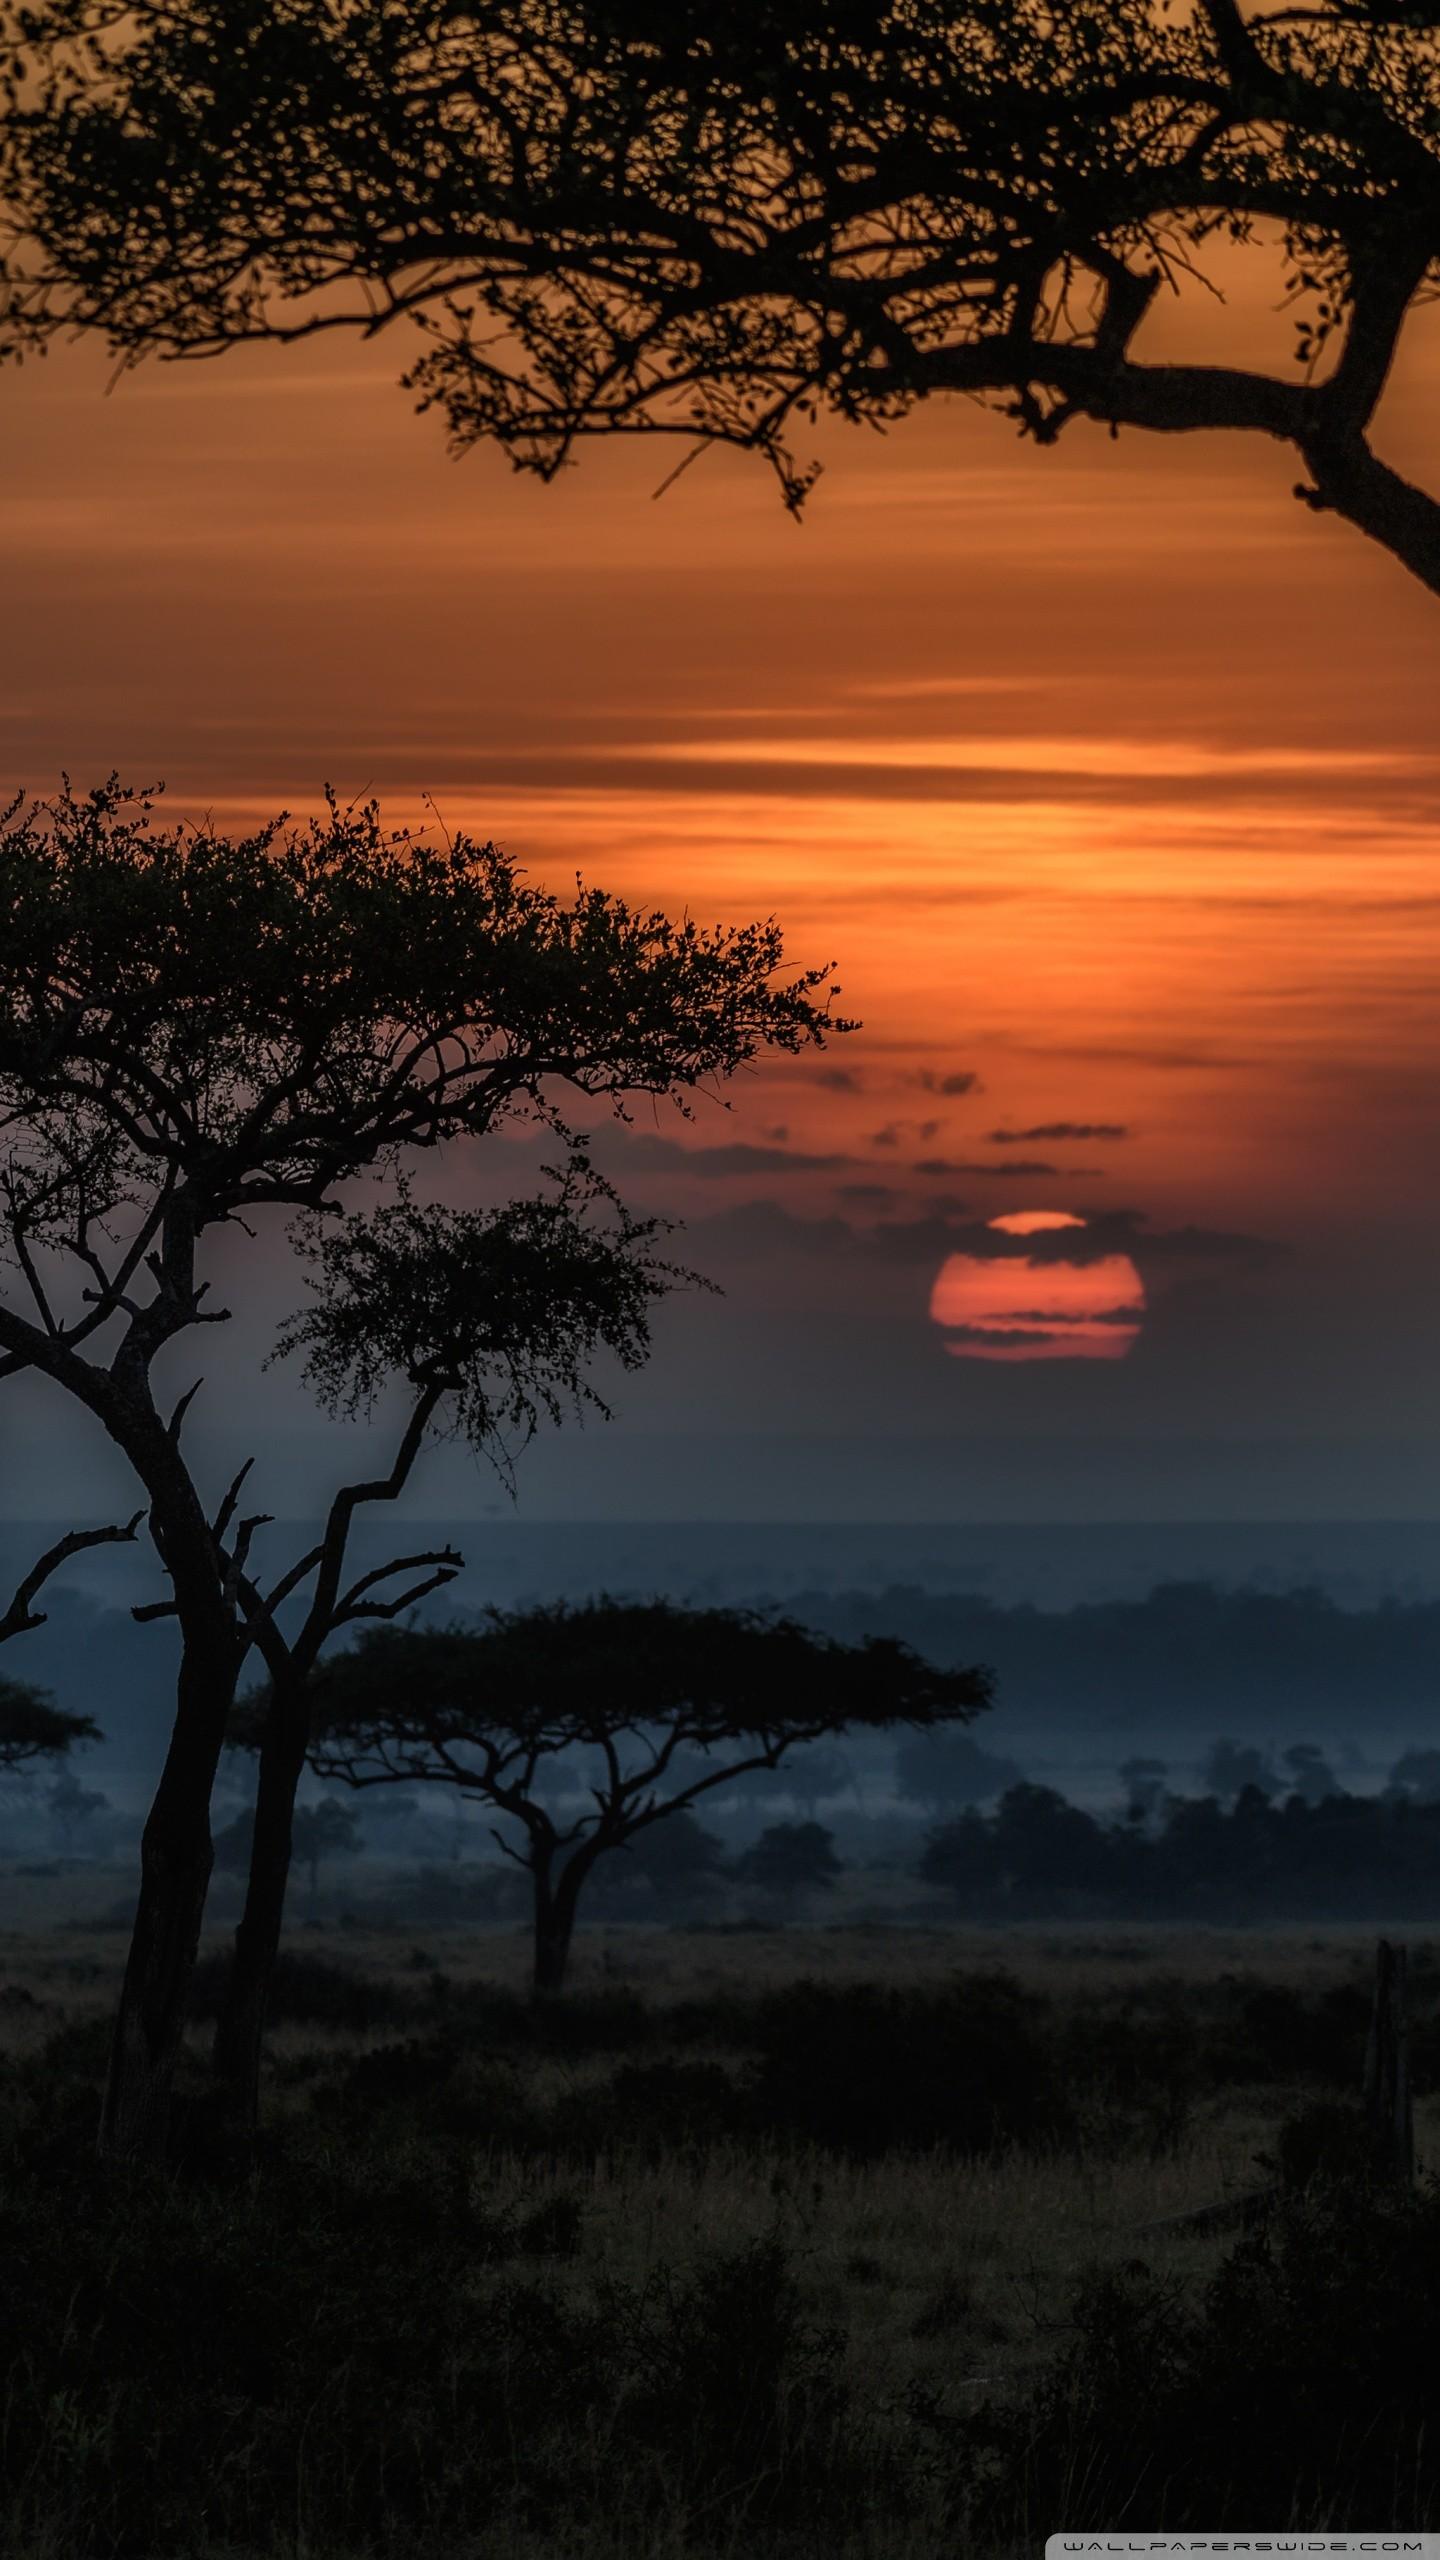 750 Stunning Africa Pictures  Download Free Images on Unsplash